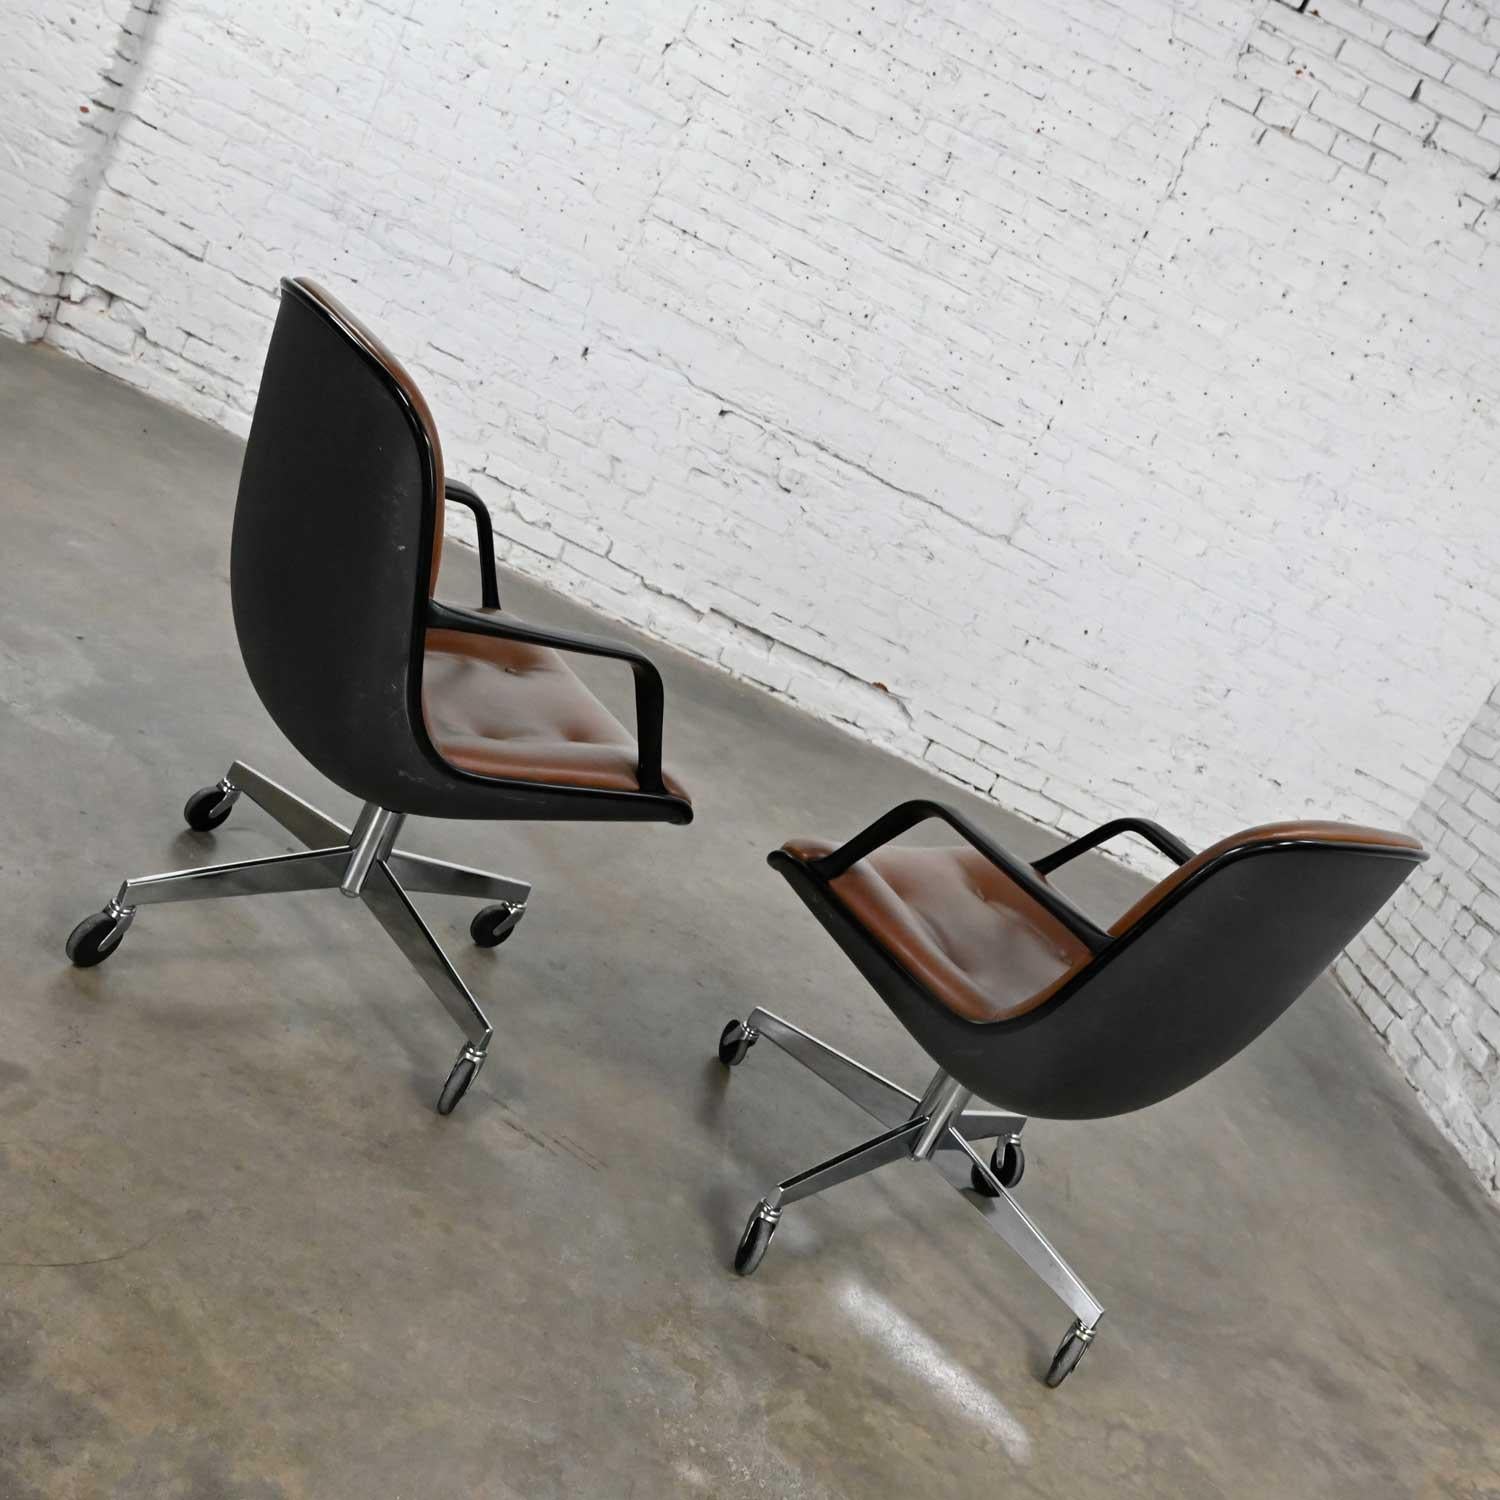 Brown Vinyl Faux Leather Pair Steelcase 451 Rolling Office Chairs Style Pollock In Good Condition For Sale In Topeka, KS